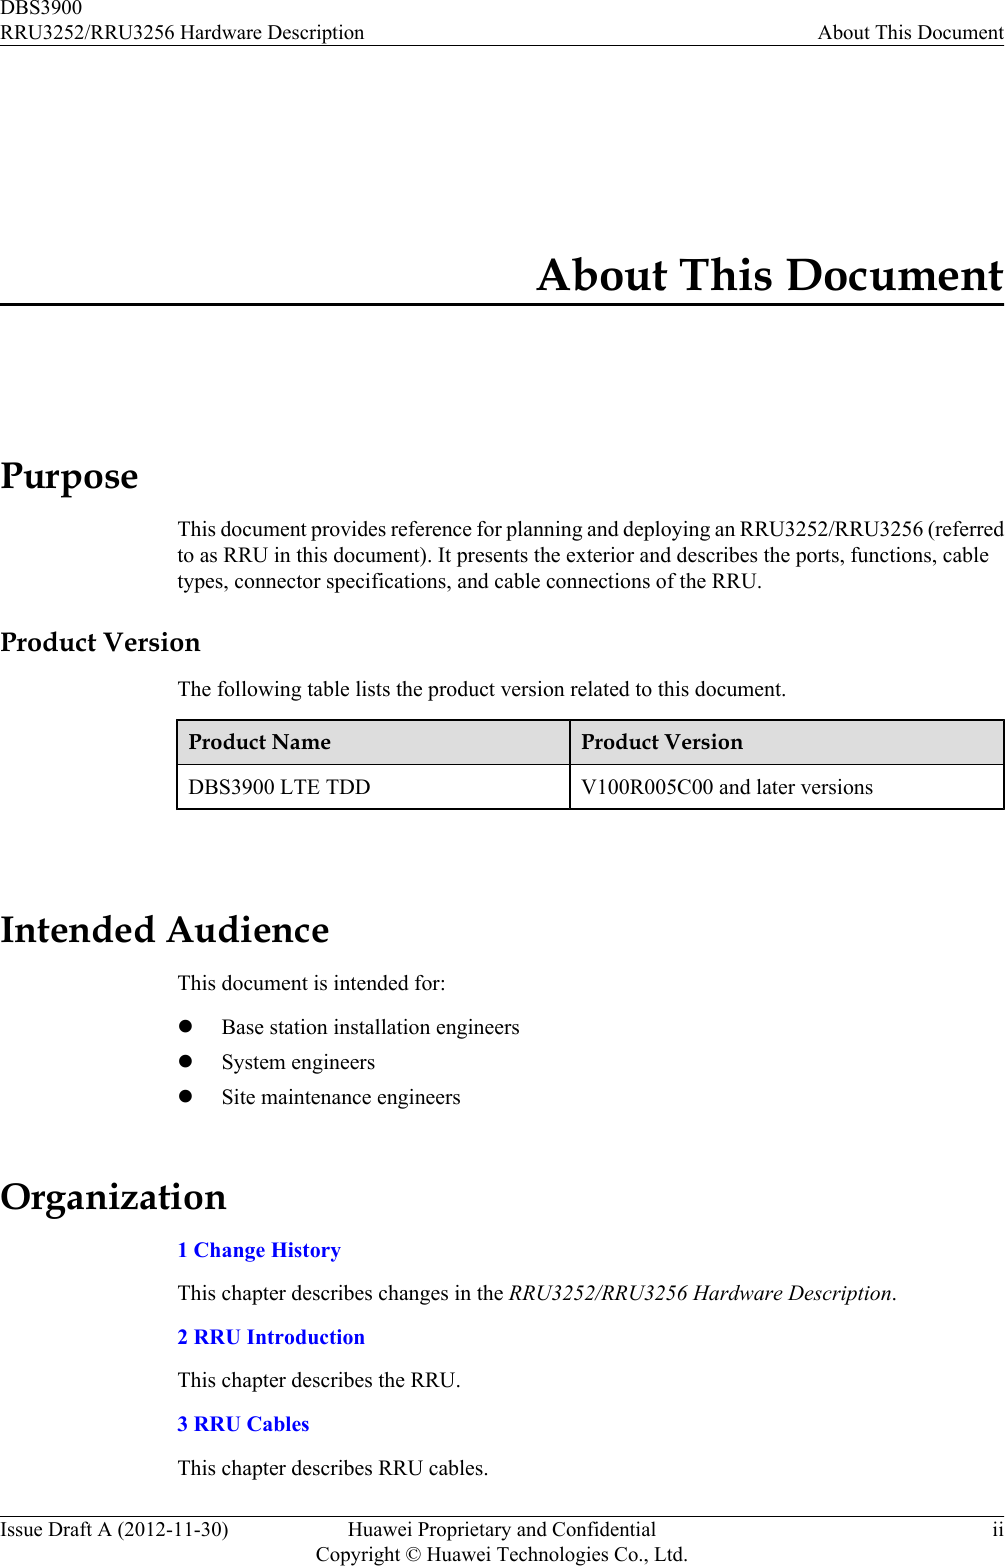 About This DocumentPurposeThis document provides reference for planning and deploying an RRU3252/RRU3256 (referredto as RRU in this document). It presents the exterior and describes the ports, functions, cabletypes, connector specifications, and cable connections of the RRU.Product VersionThe following table lists the product version related to this document.Product Name Product VersionDBS3900 LTE TDD V100R005C00 and later versions Intended AudienceThis document is intended for:lBase station installation engineerslSystem engineerslSite maintenance engineersOrganization1 Change HistoryThis chapter describes changes in the RRU3252/RRU3256 Hardware Description.2 RRU IntroductionThis chapter describes the RRU.3 RRU CablesThis chapter describes RRU cables.DBS3900RRU3252/RRU3256 Hardware Description About This DocumentIssue Draft A (2012-11-30) Huawei Proprietary and ConfidentialCopyright © Huawei Technologies Co., Ltd.ii